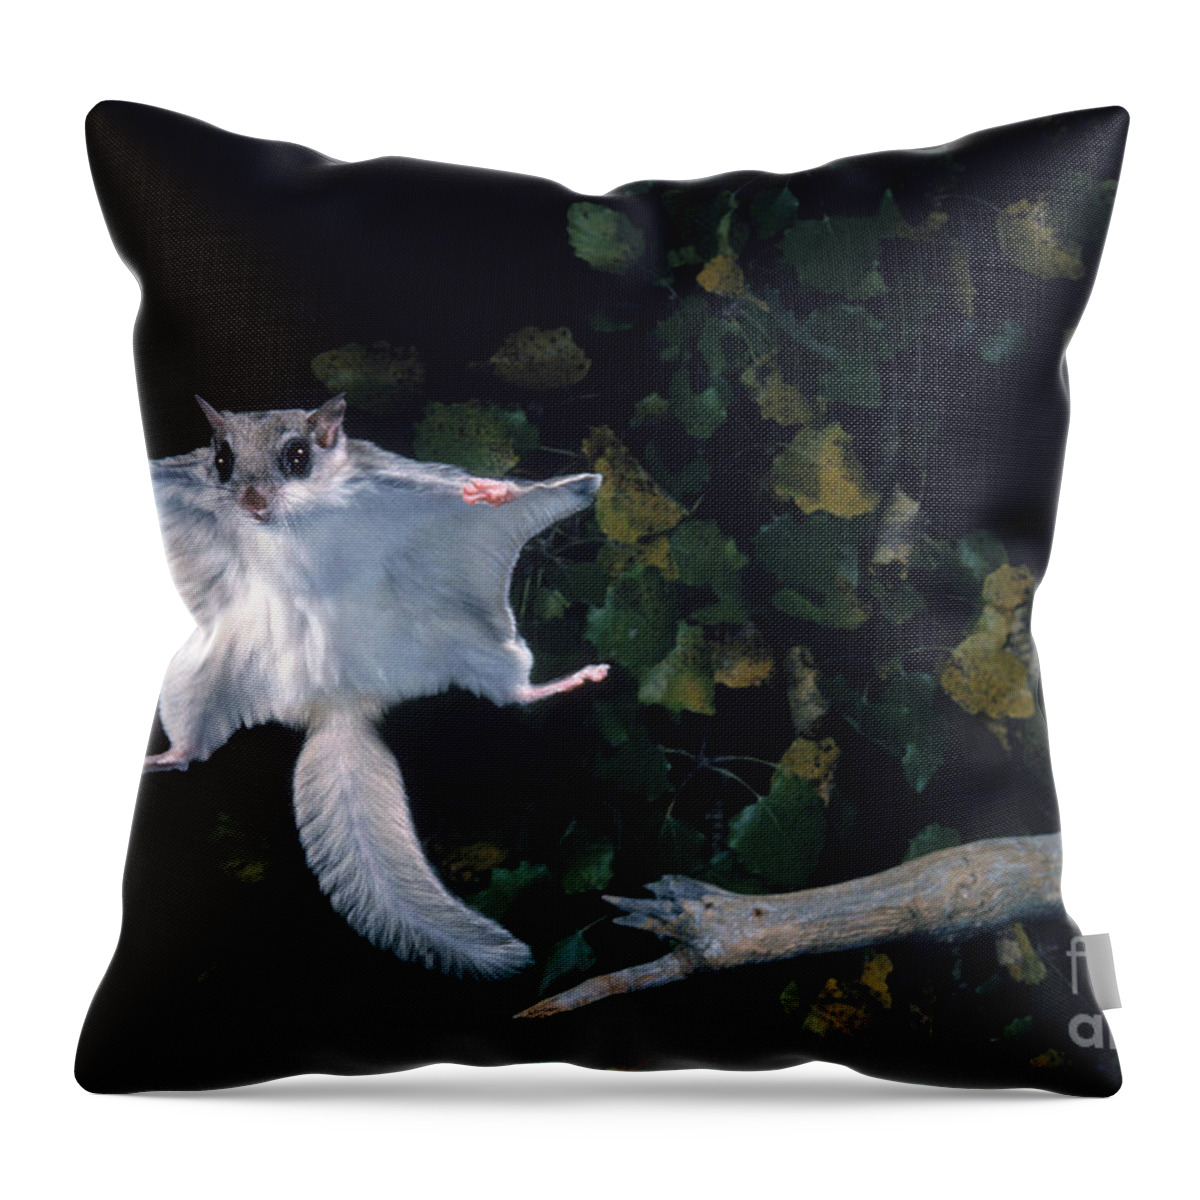 Southern Flying Squirrel Throw Pillow featuring the photograph Southern Flying Squirrel by Nick Bergkessel Jr